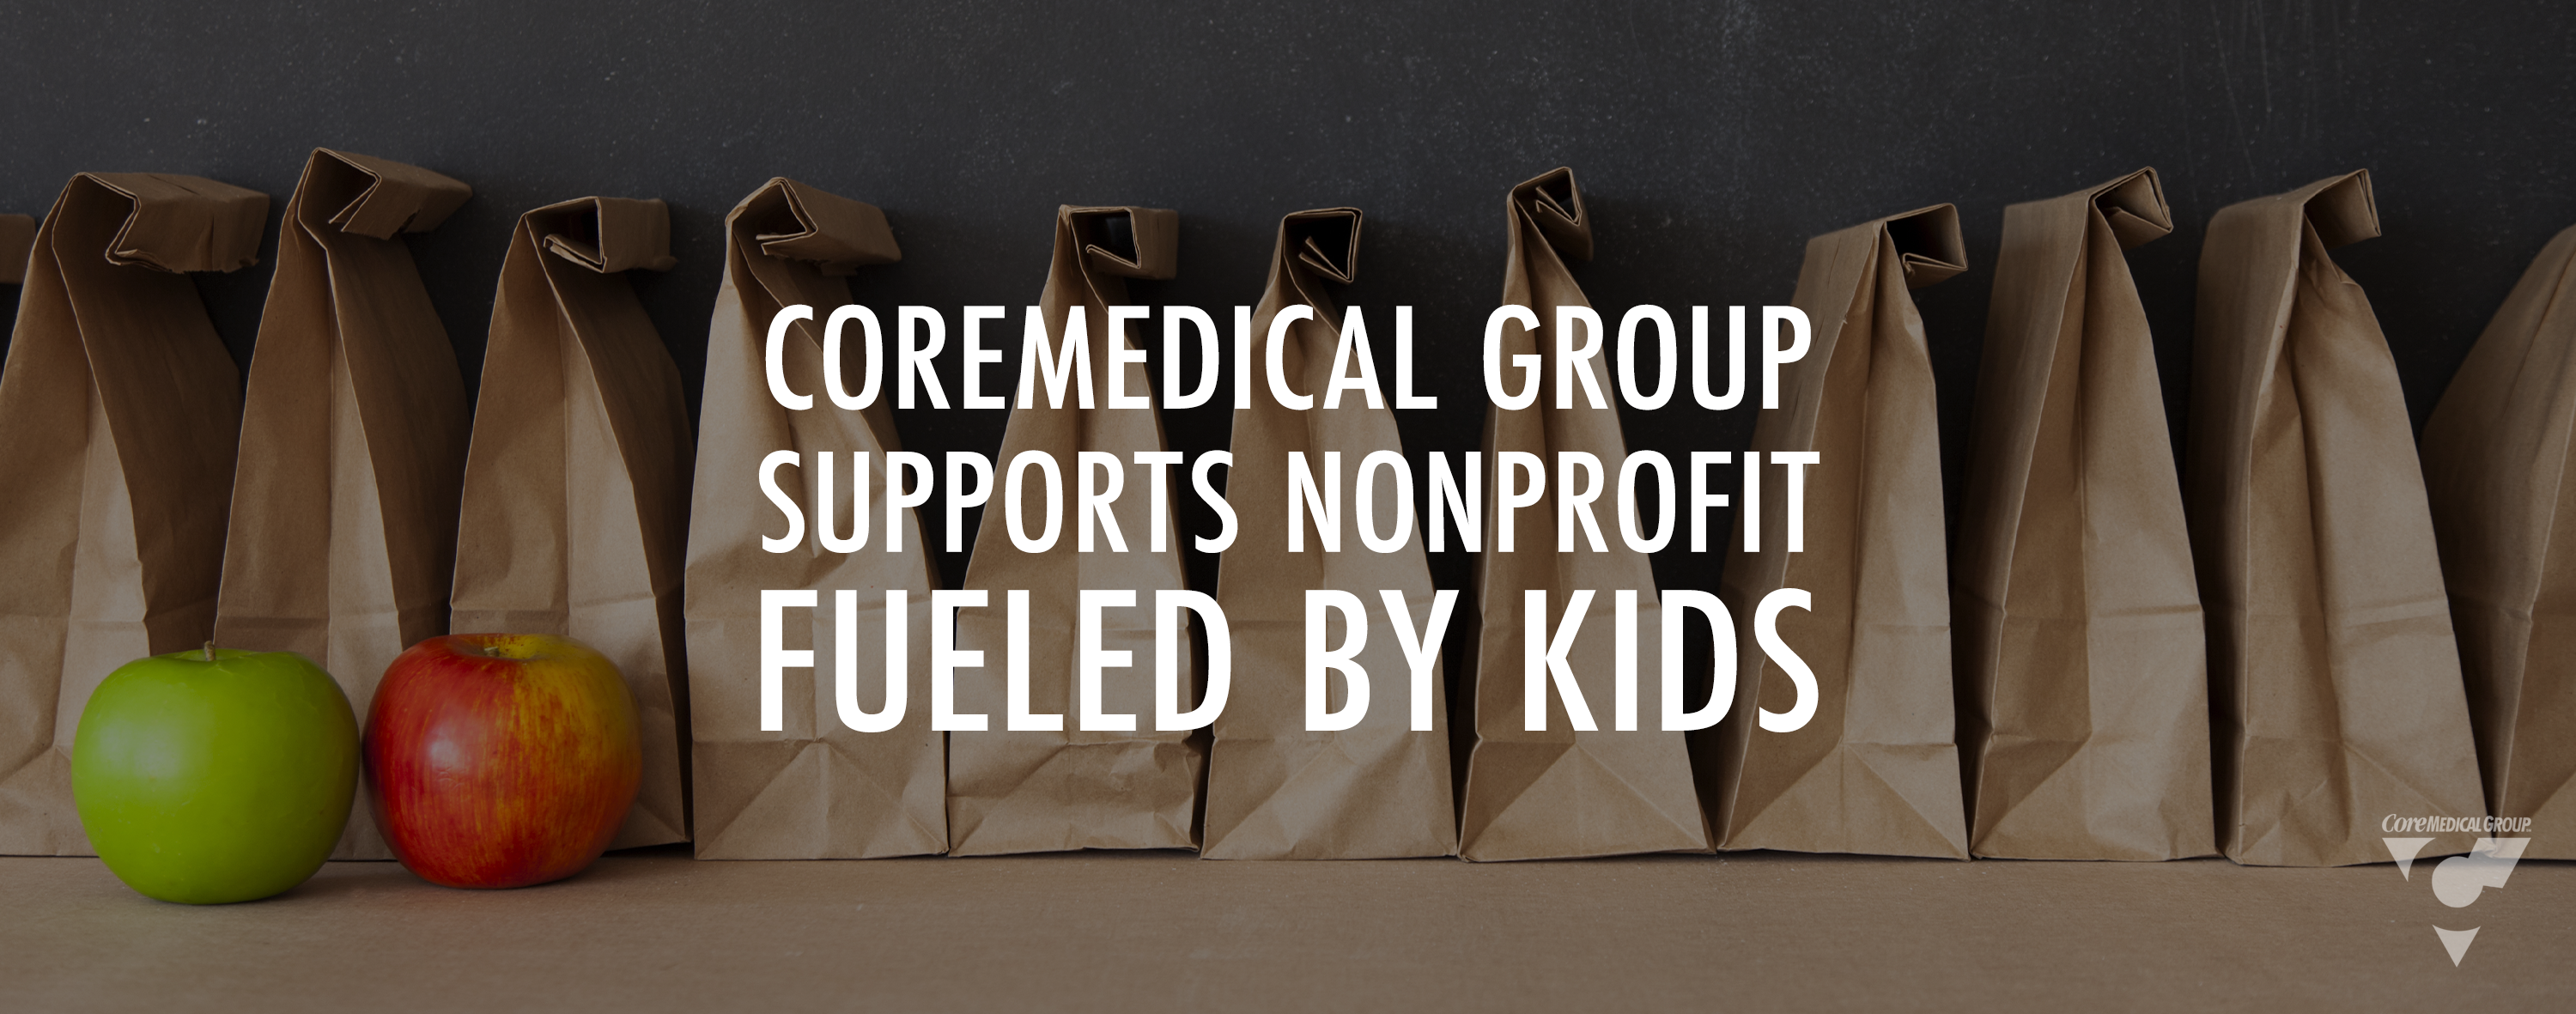 CMG_Blog_Featuredimages_Supports_Nonprofit_Fueled_By_Kids_Blog